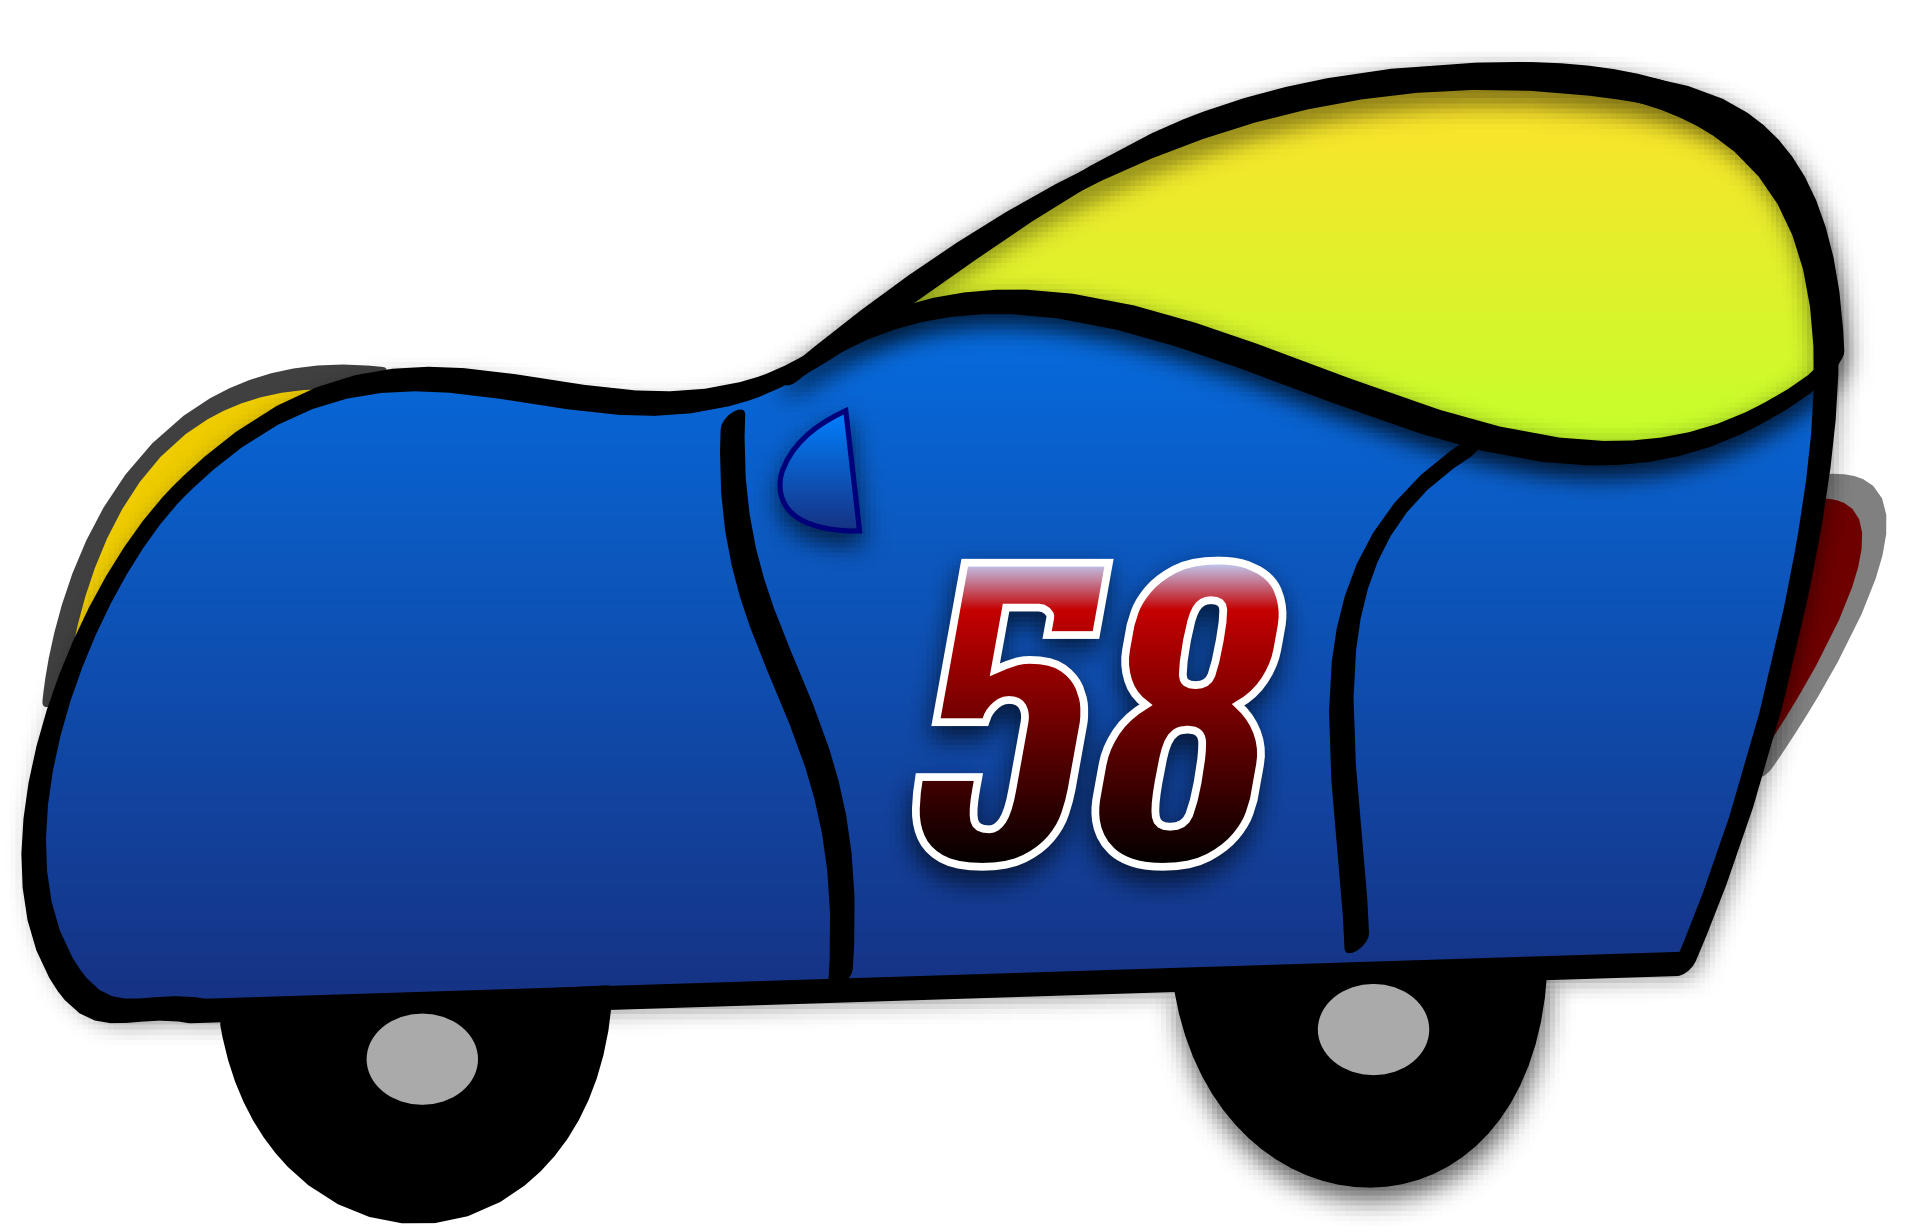 Blue car 58 funny drawing free image download